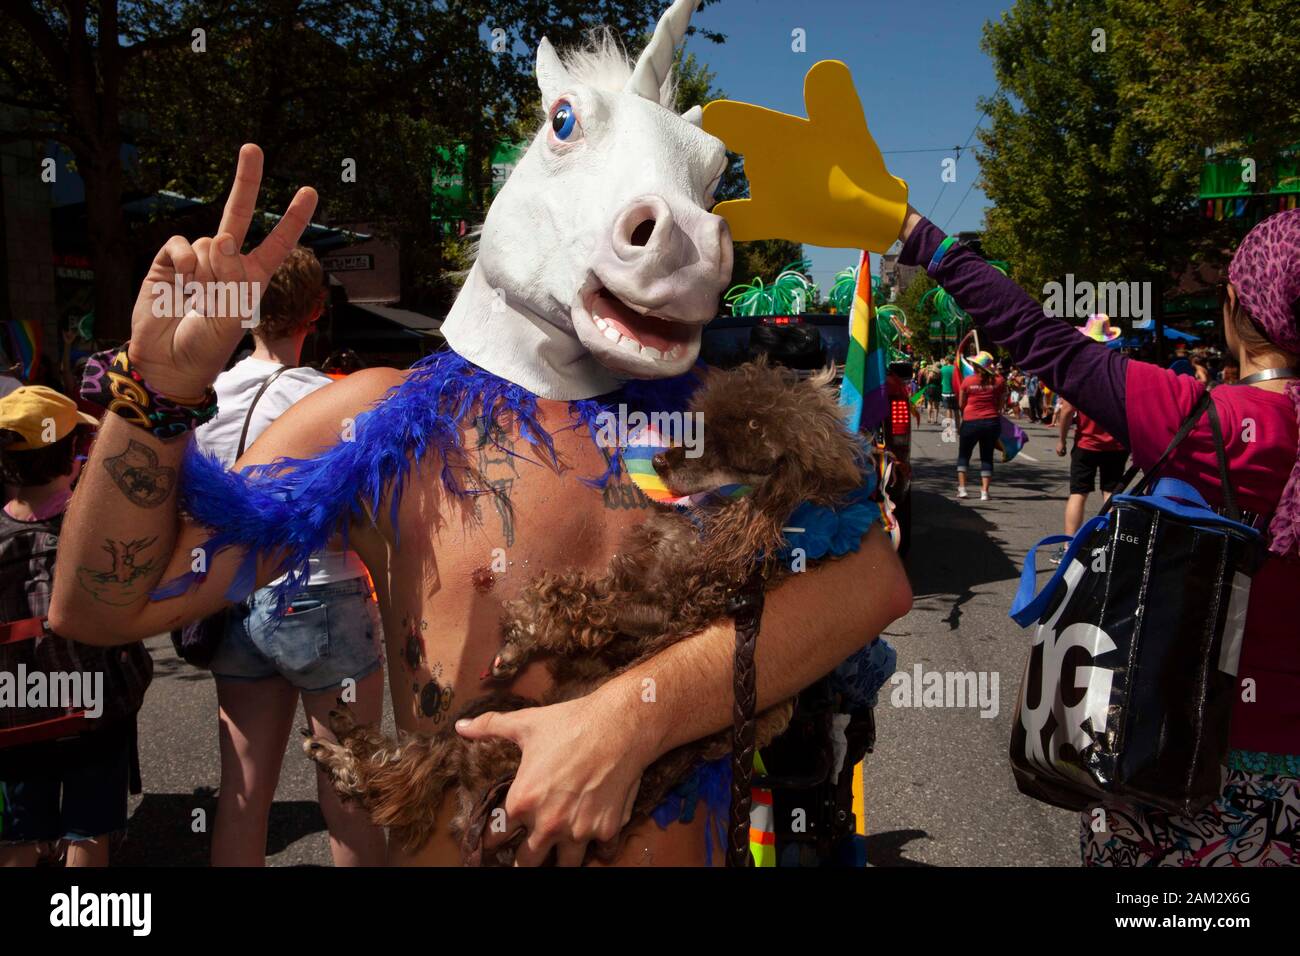 Pride parade participant wearing unicorn head mask making peace sign and carrying pet poodle, Vancouver Pride Festival 2014, Vancouver, Canada Stock Photo